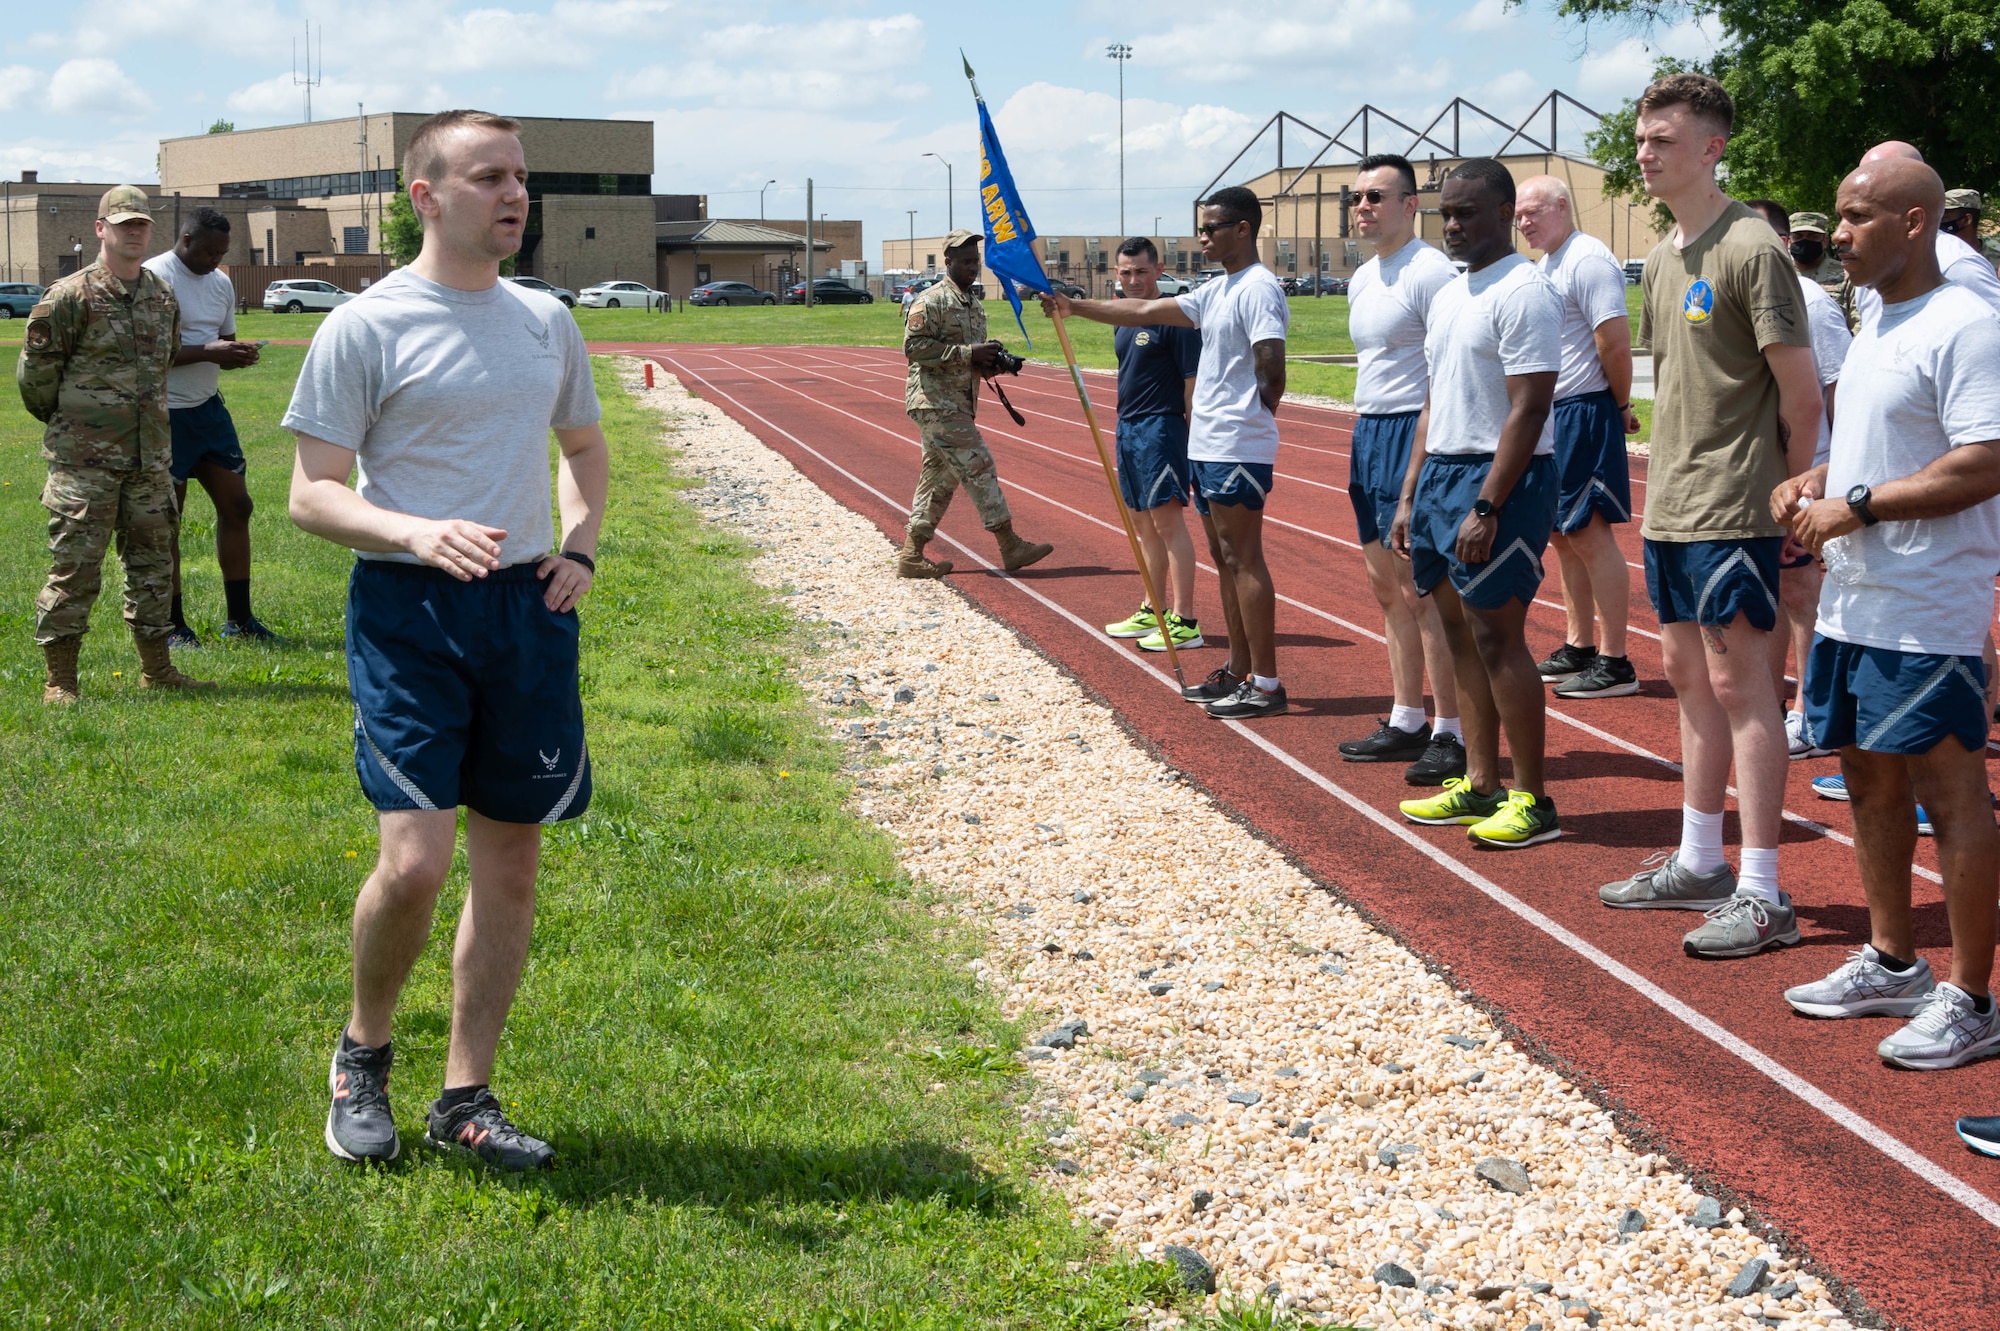 U.S. Air Force Captain Alex Lenser, 69th Aerial Port Squadron flight commander of ramp operations, gives closing remarks to 459th LRS Airmen following the completion of a memorial run at Joint Base Andrews, Maryland, May 15, 2022. The run, which began at Kadena Air Base, Japan, in 2013, honors Air Transportation Airmen who lost their lives over the past year. Seven aerial port Airmen died last year. Members in the career field say "they are 'blocked out,' but not forgotten." (U.S. Air Force Photo by Staff Sgt. Andreaa Phillips)